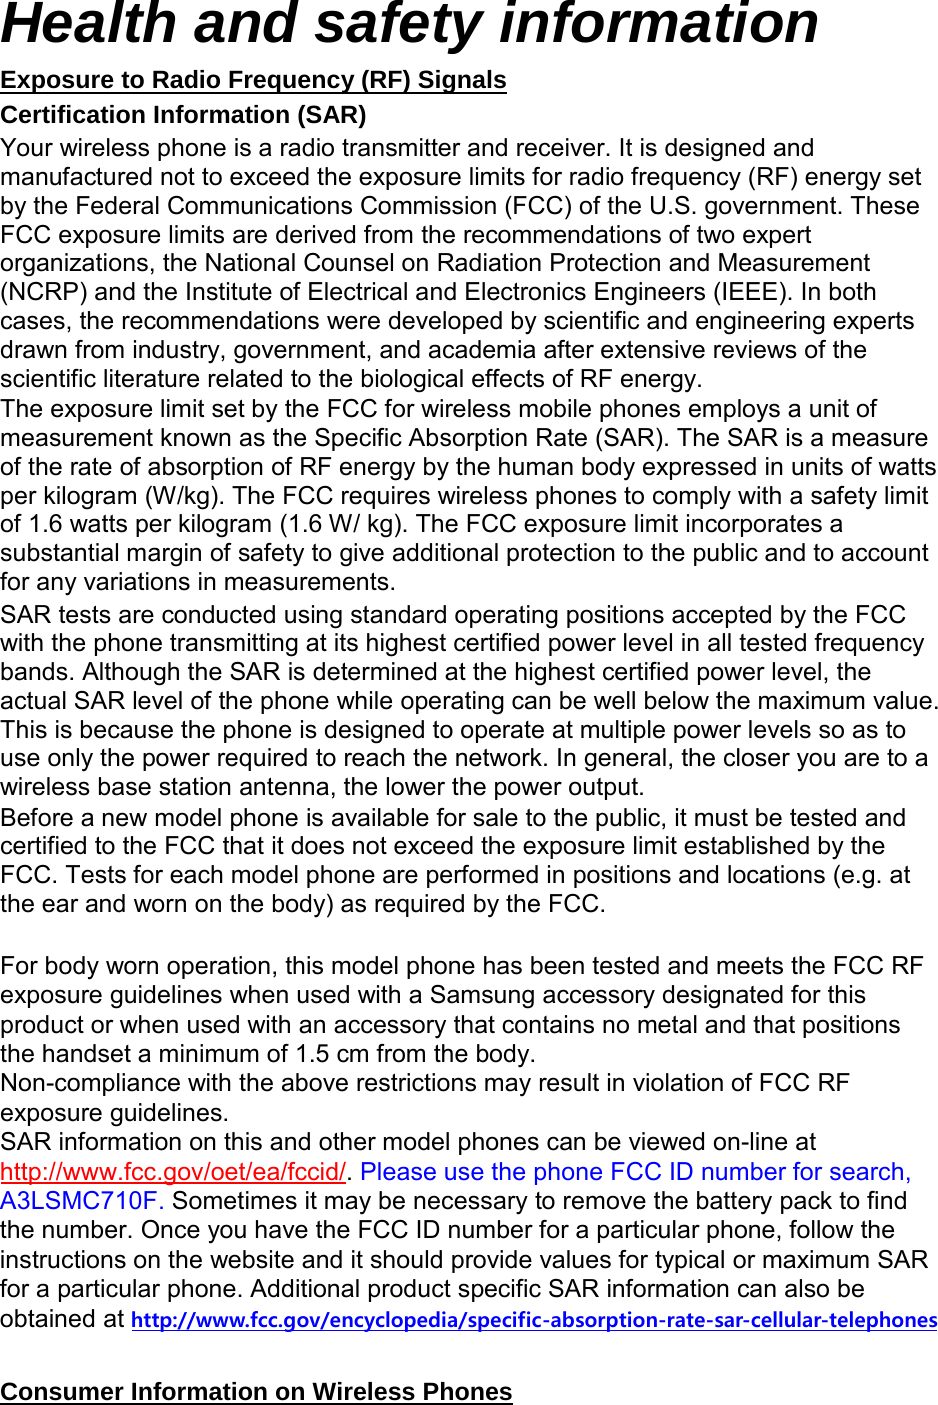 Health and safety information Exposure to Radio Frequency (RF) Signals Certification Information (SAR) Your wireless phone is a radio transmitter and receiver. It is designed and manufactured not to exceed the exposure limits for radio frequency (RF) energy set by the Federal Communications Commission (FCC) of the U.S. government. These FCC exposure limits are derived from the recommendations of two expert organizations, the National Counsel on Radiation Protection and Measurement (NCRP) and the Institute of Electrical and Electronics Engineers (IEEE). In both cases, the recommendations were developed by scientific and engineering experts drawn from industry, government, and academia after extensive reviews of the scientific literature related to the biological effects of RF energy. The exposure limit set by the FCC for wireless mobile phones employs a unit of measurement known as the Specific Absorption Rate (SAR). The SAR is a measure of the rate of absorption of RF energy by the human body expressed in units of watts per kilogram (W/kg). The FCC requires wireless phones to comply with a safety limit of 1.6 watts per kilogram (1.6 W/ kg). The FCC exposure limit incorporates a substantial margin of safety to give additional protection to the public and to account for any variations in measurements. SAR tests are conducted using standard operating positions accepted by the FCC with the phone transmitting at its highest certified power level in all tested frequency bands. Although the SAR is determined at the highest certified power level, the actual SAR level of the phone while operating can be well below the maximum value. This is because the phone is designed to operate at multiple power levels so as to use only the power required to reach the network. In general, the closer you are to a wireless base station antenna, the lower the power output. Before a new model phone is available for sale to the public, it must be tested and certified to the FCC that it does not exceed the exposure limit established by the FCC. Tests for each model phone are performed in positions and locations (e.g. at the ear and worn on the body) as required by the FCC.     For body worn operation, this model phone has been tested and meets the FCC RF exposure guidelines when used with a Samsung accessory designated for this product or when used with an accessory that contains no metal and that positions the handset a minimum of 1.5 cm from the body.  Non-compliance with the above restrictions may result in violation of FCC RF exposure guidelines. SAR information on this and other model phones can be viewed on-line at http://www.fcc.gov/oet/ea/fccid/. Please use the phone FCC ID number for search, A3LSMC710F. Sometimes it may be necessary to remove the battery pack to find the number. Once you have the FCC ID number for a particular phone, follow the instructions on the website and it should provide values for typical or maximum SAR for a particular phone. Additional product specific SAR information can also be obtained at http://www.fcc.gov/encyclopedia/specific-absorption-rate-sar-cellular-telephonesConsumer Information on Wireless Phones 